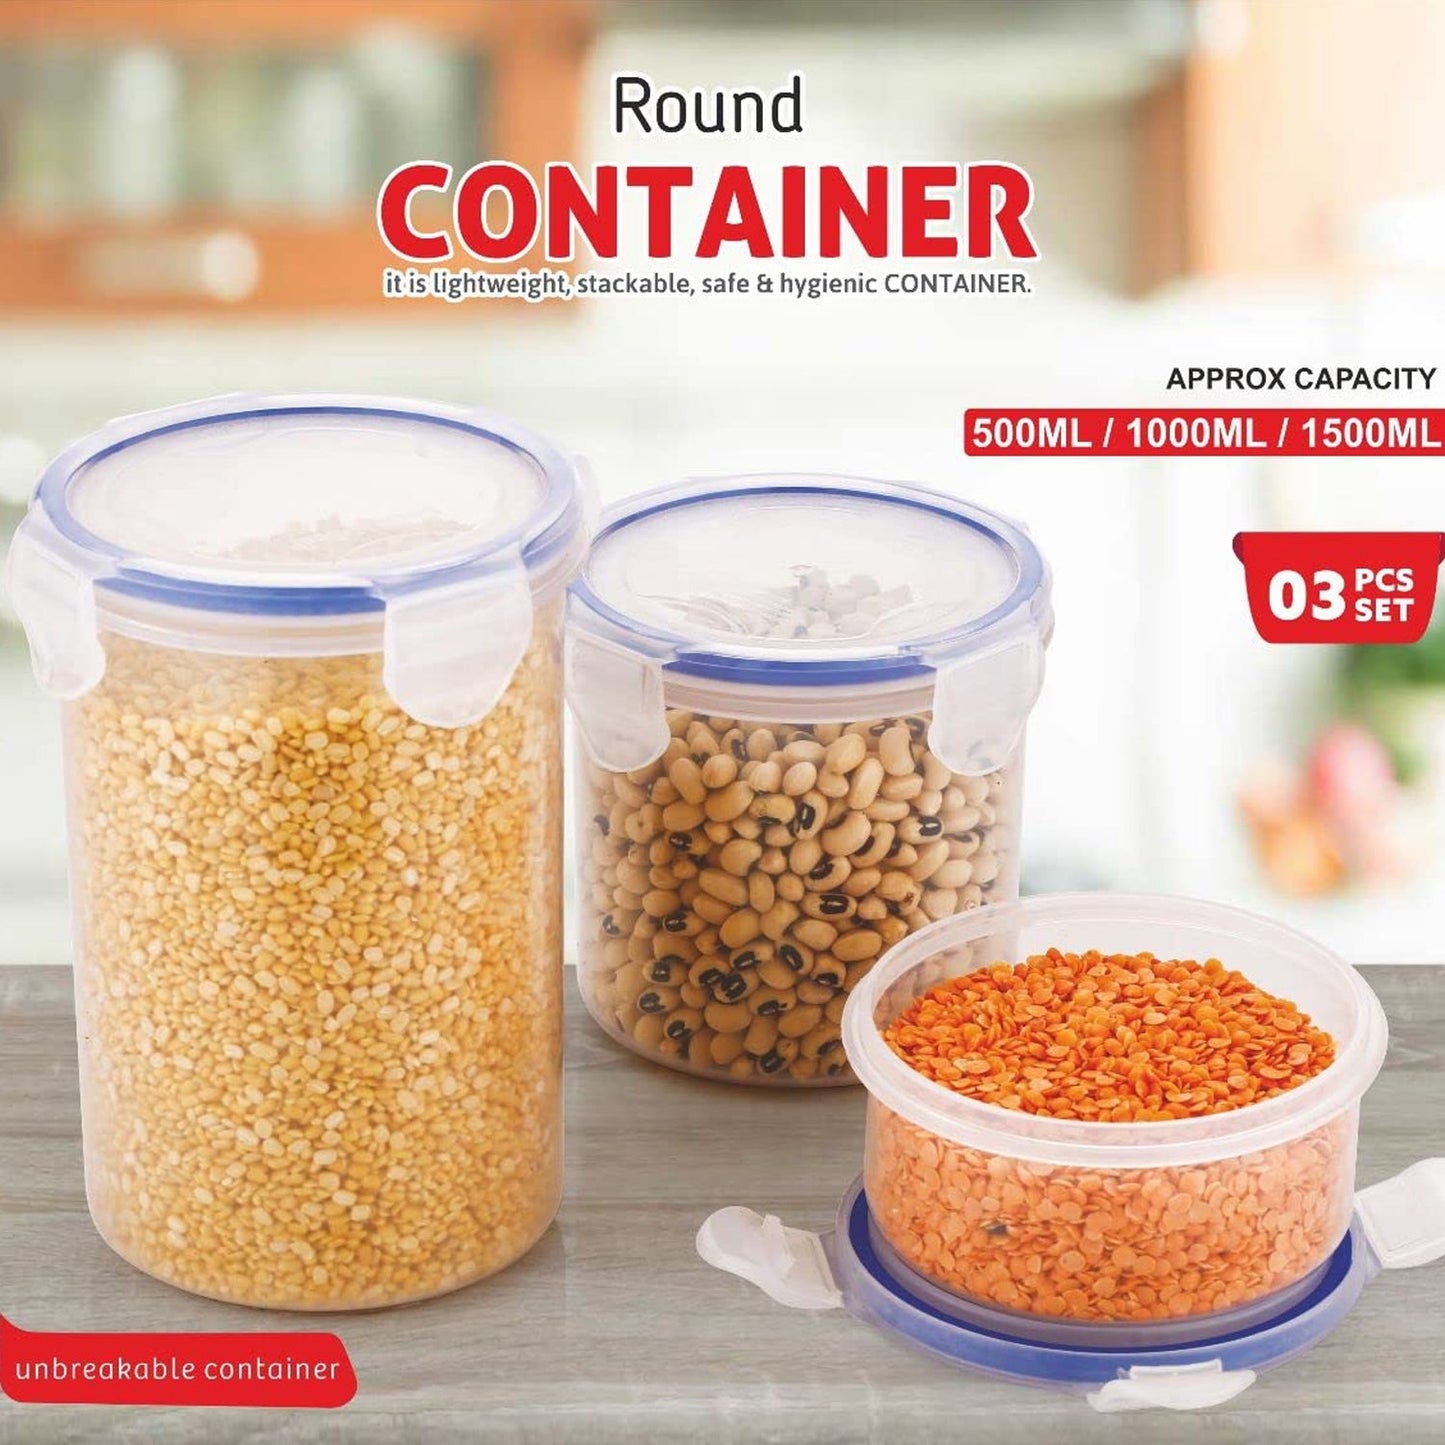 5828 Round Plastic Airtight Food Storage Containers with Leak Proof Locking Lid Storage container set of 3( Approx Capacity 500ml,1000ml,1500ml, Transparent) - 3 Pc Set